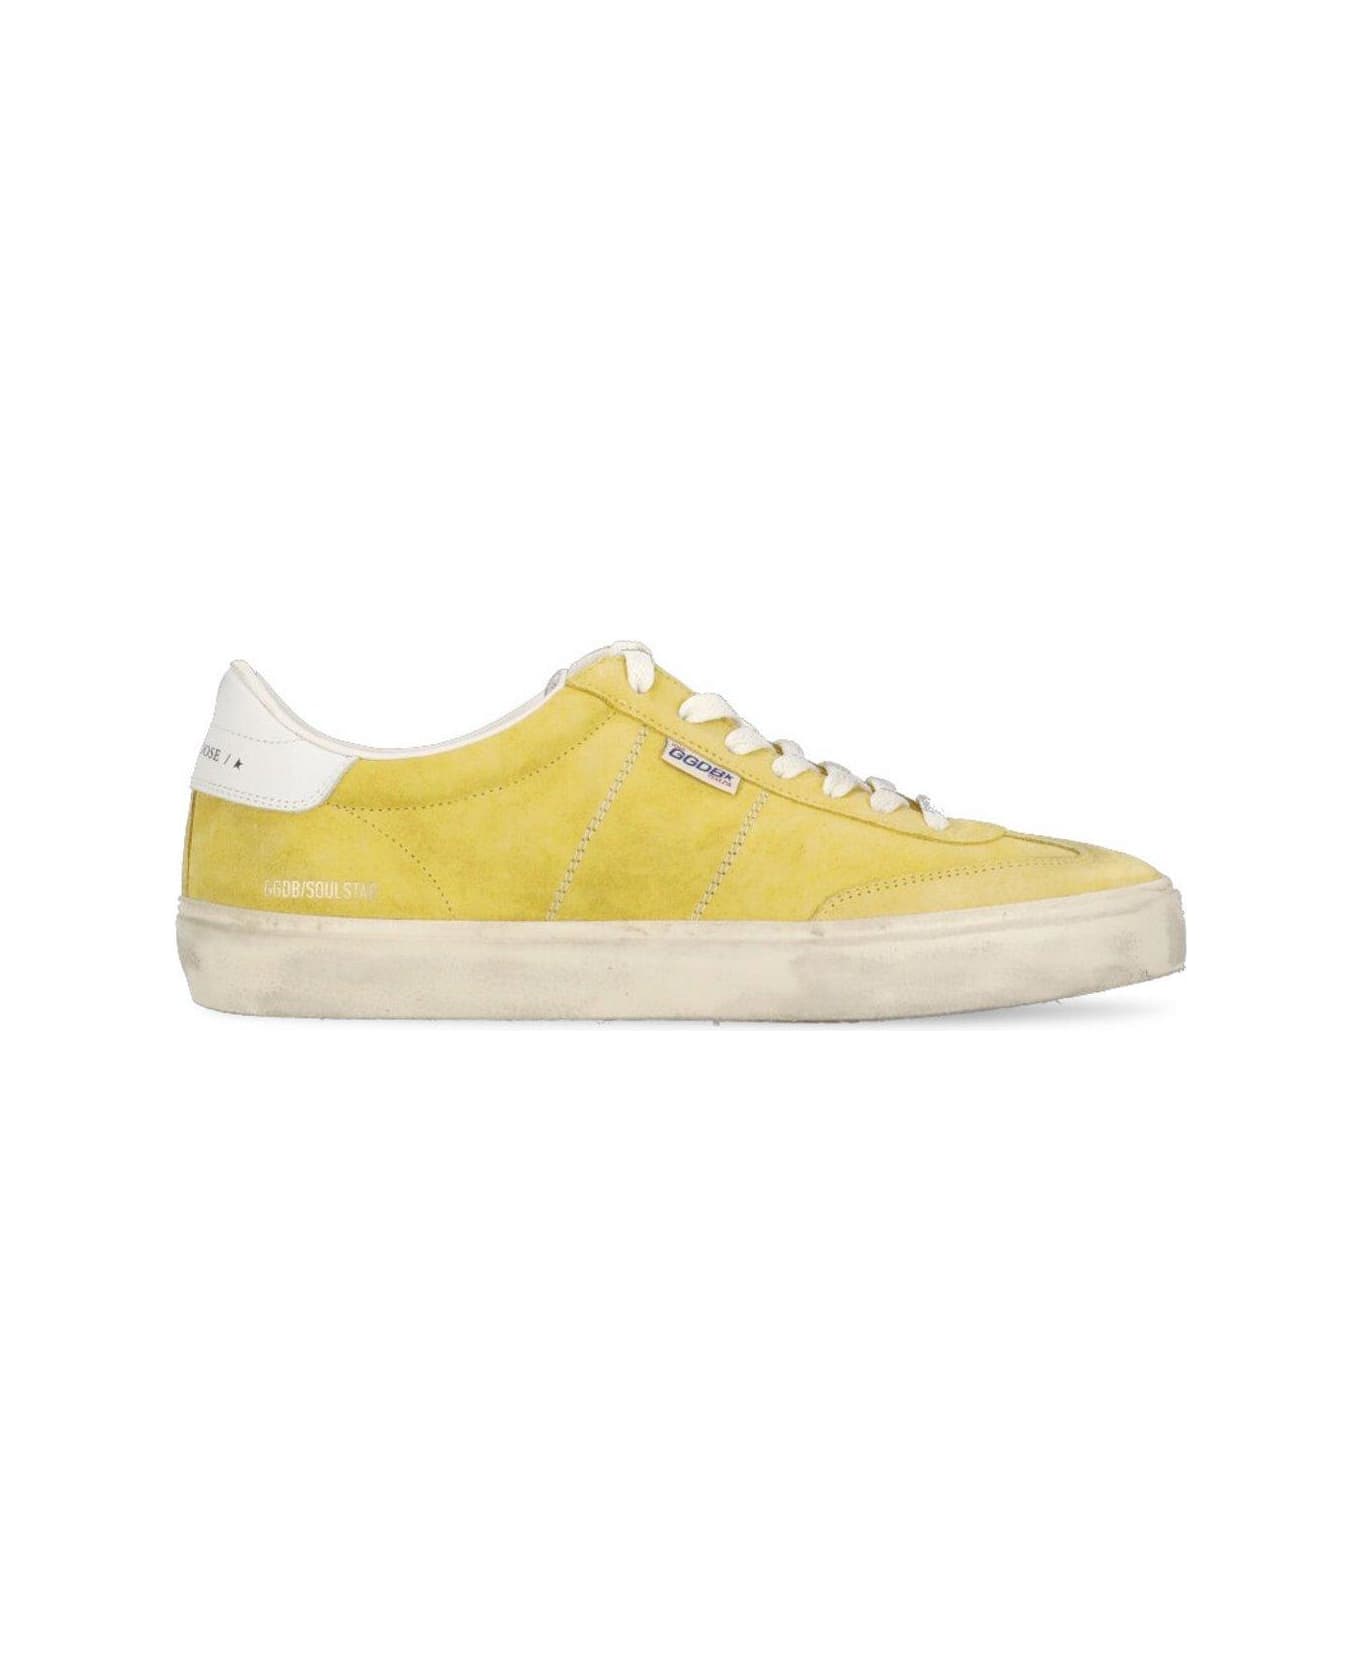 Golden Goose Soul Star Lace-up Sneakers - Yellow スニーカー